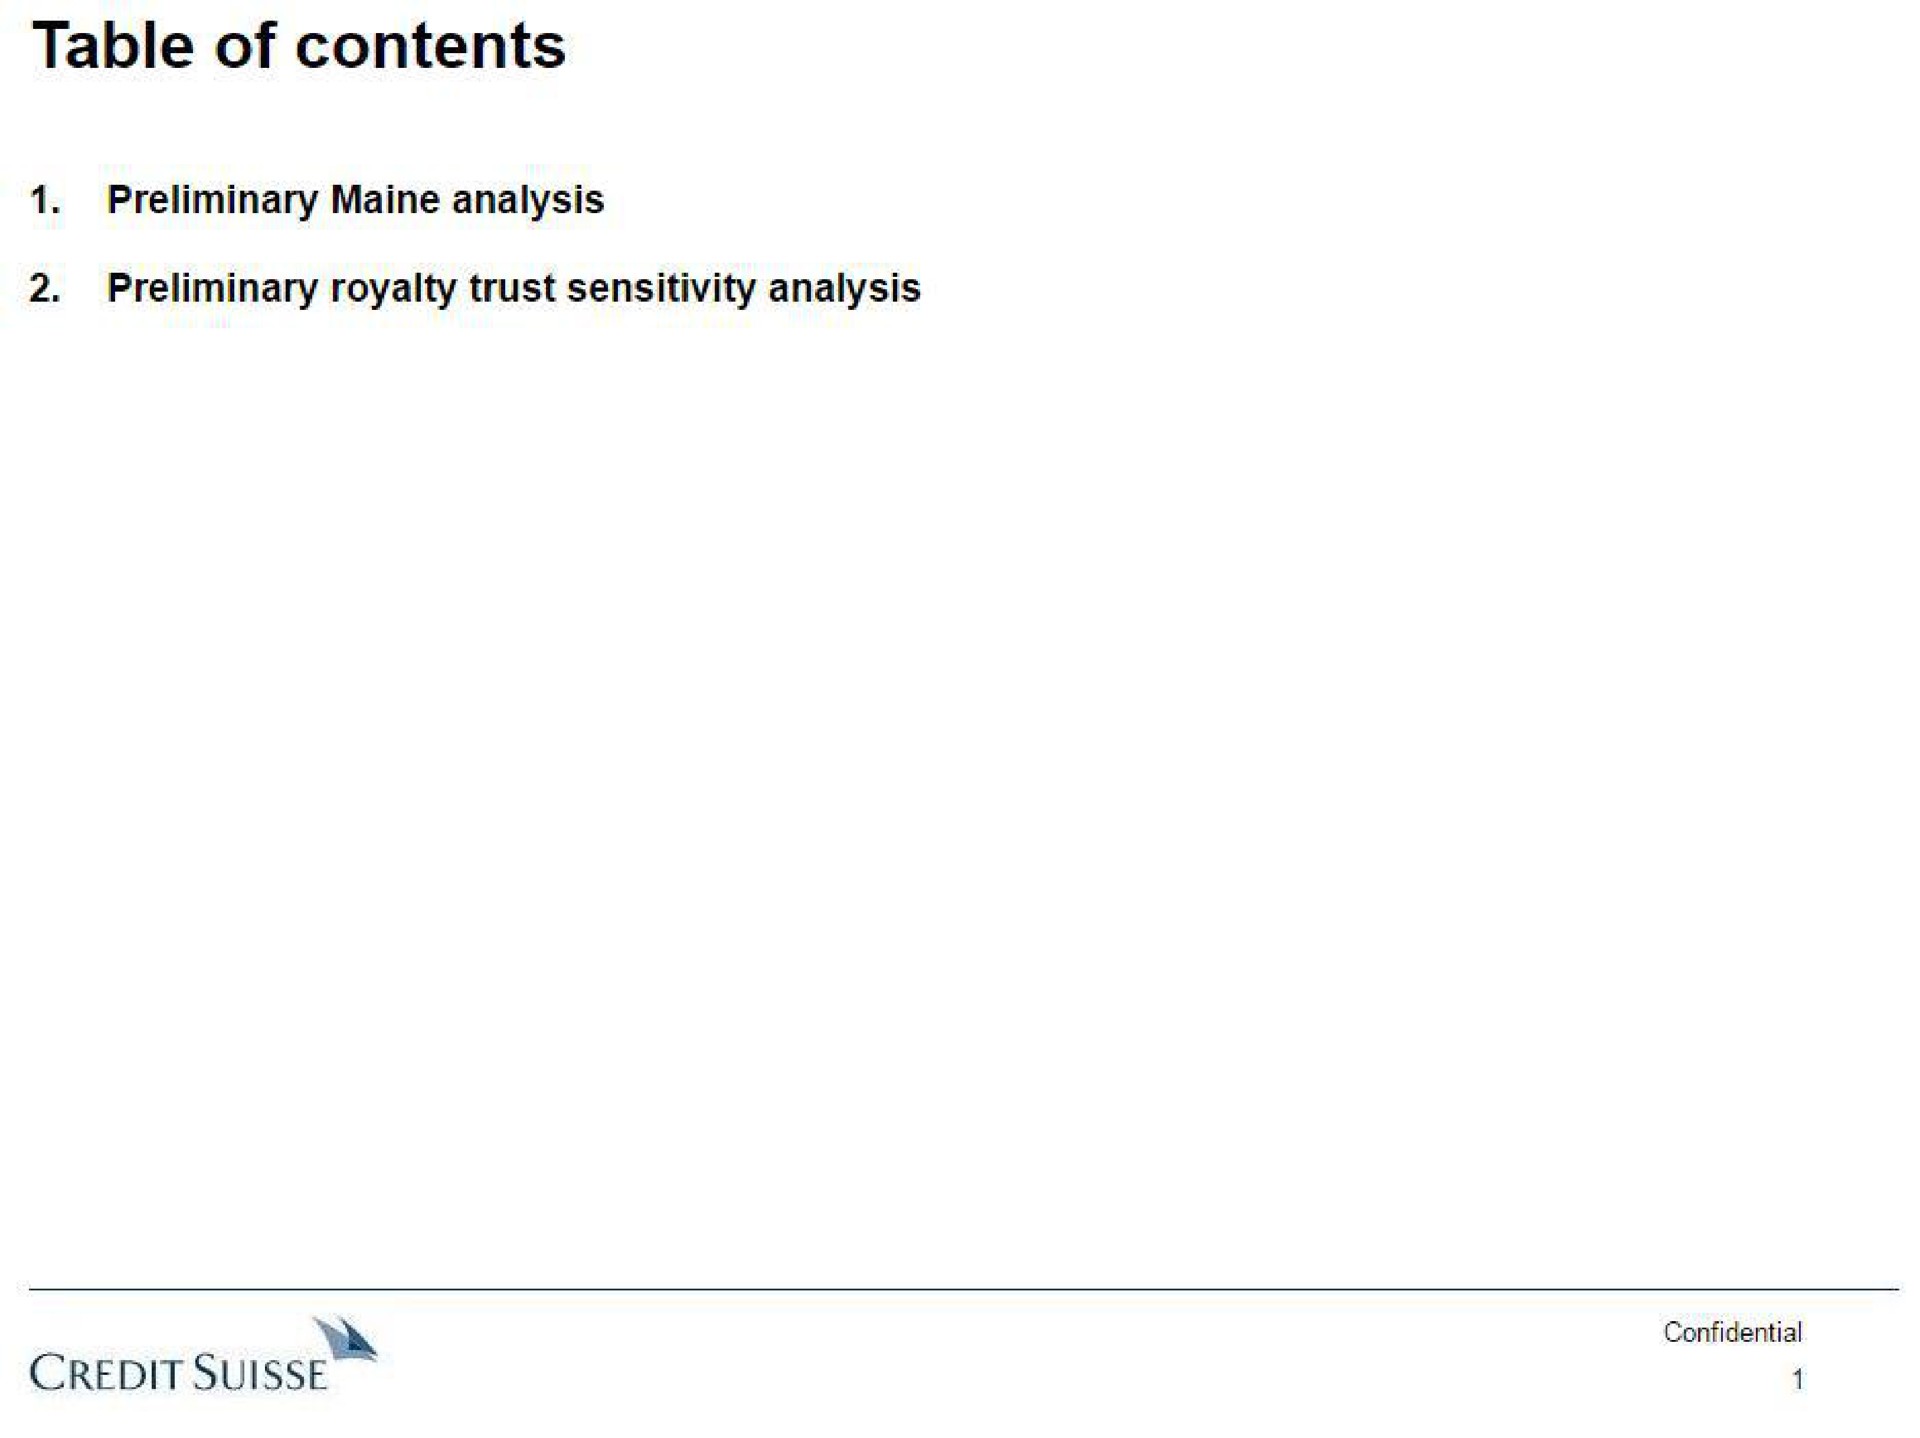 table of contents credit i | Credit Suisse